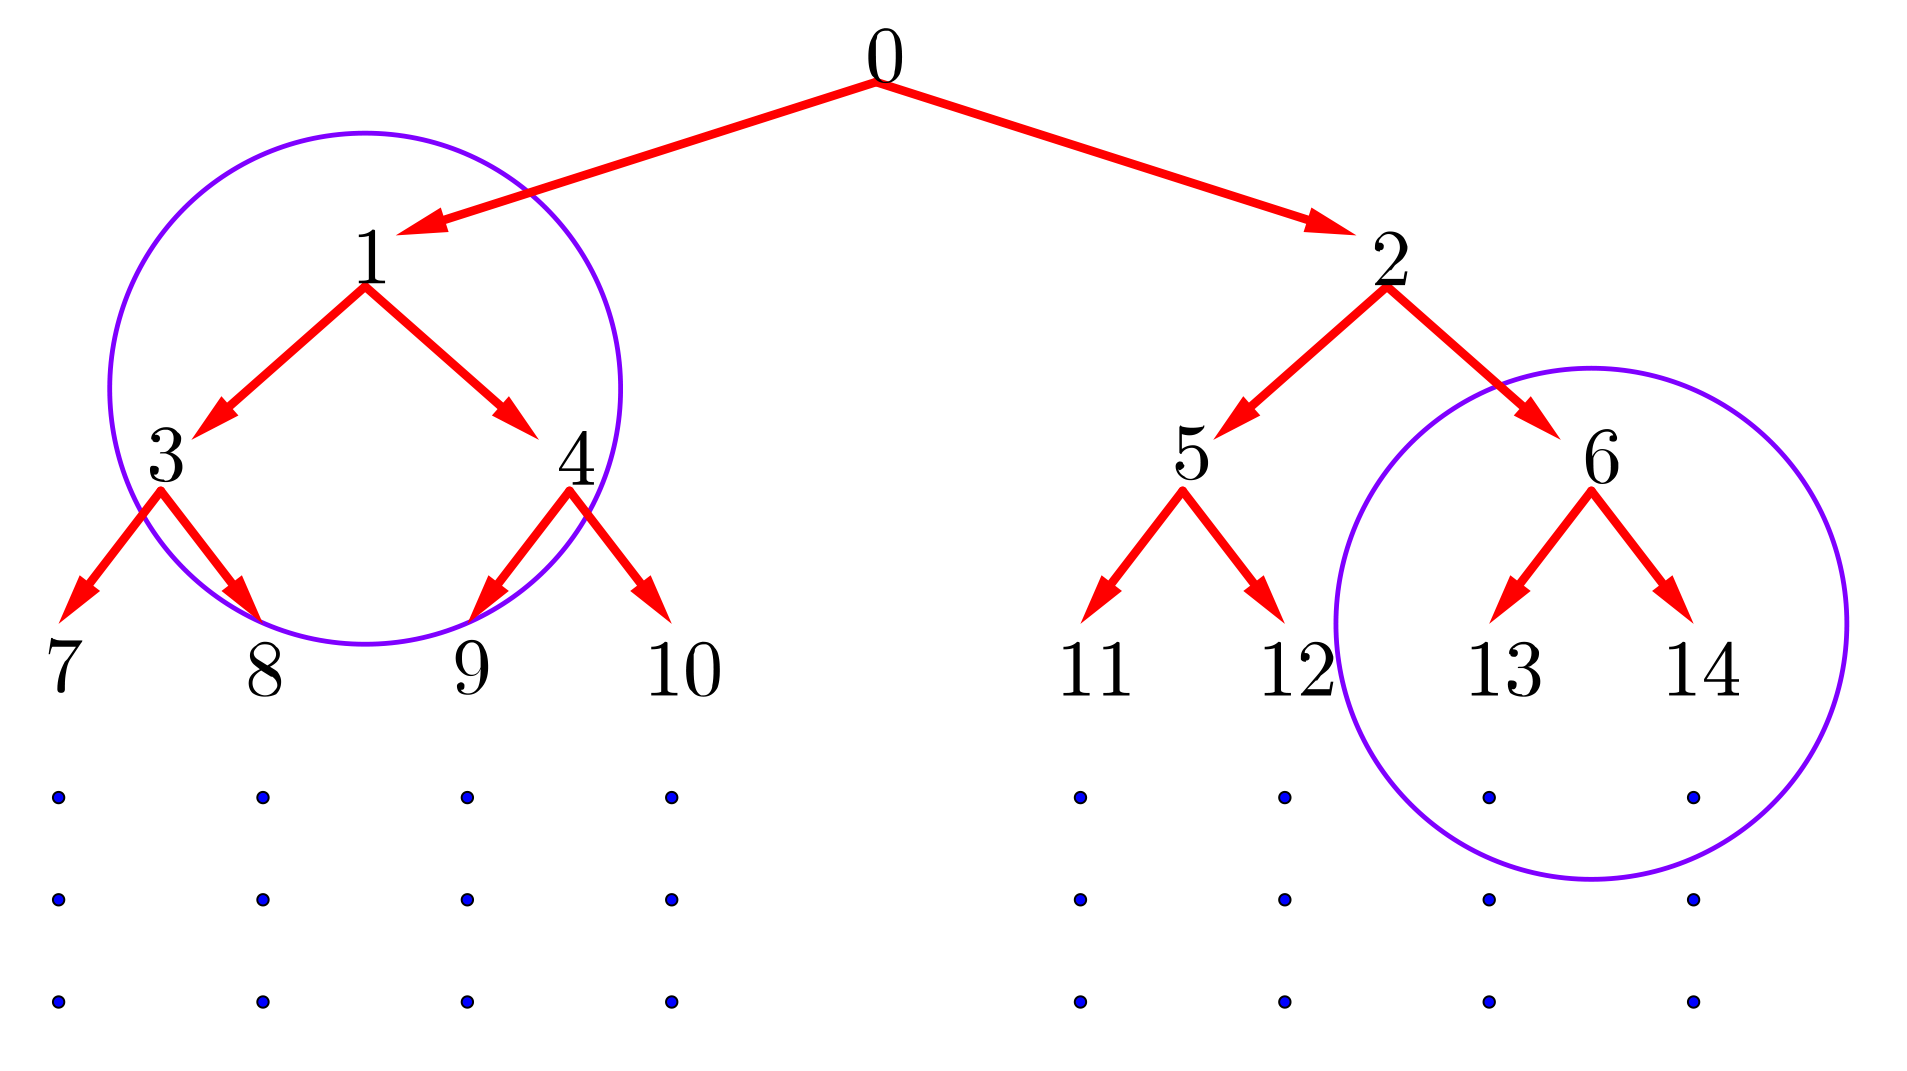 The group of numbers 1, 3 and 4 is circled. 1 is connected to 3 and 4 in the row below. The group of numbers 6, 13, and 14 is also circled. 6 is connected to 13 and 14 in the row below.